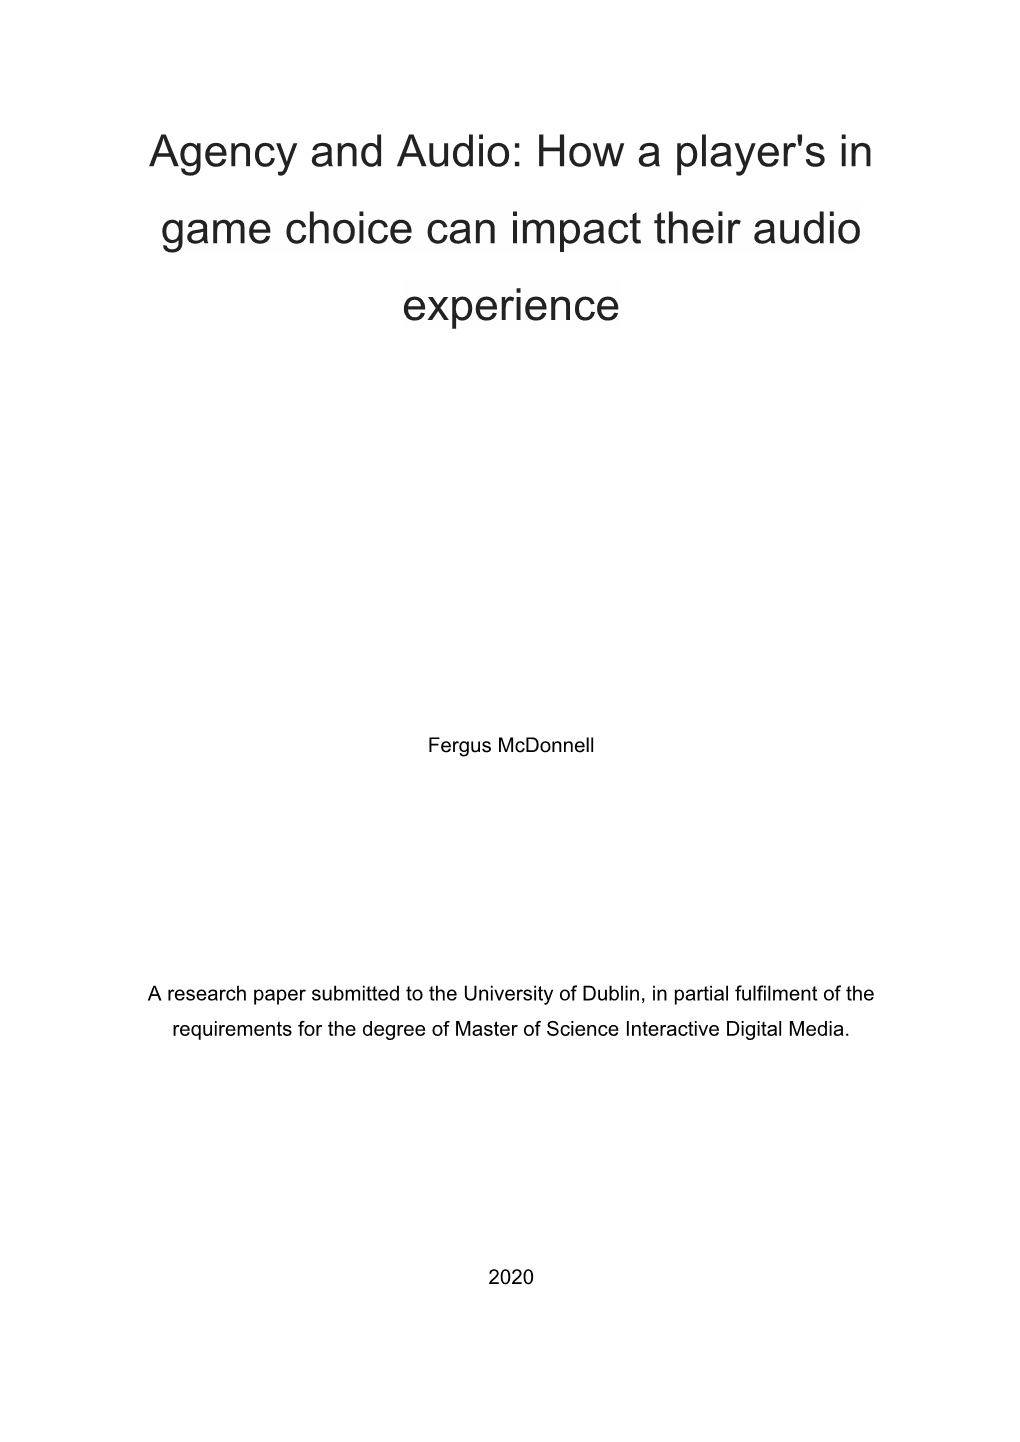 Agency and Audio: How a Player's in Game Choice Can Impact Their Audio Experience